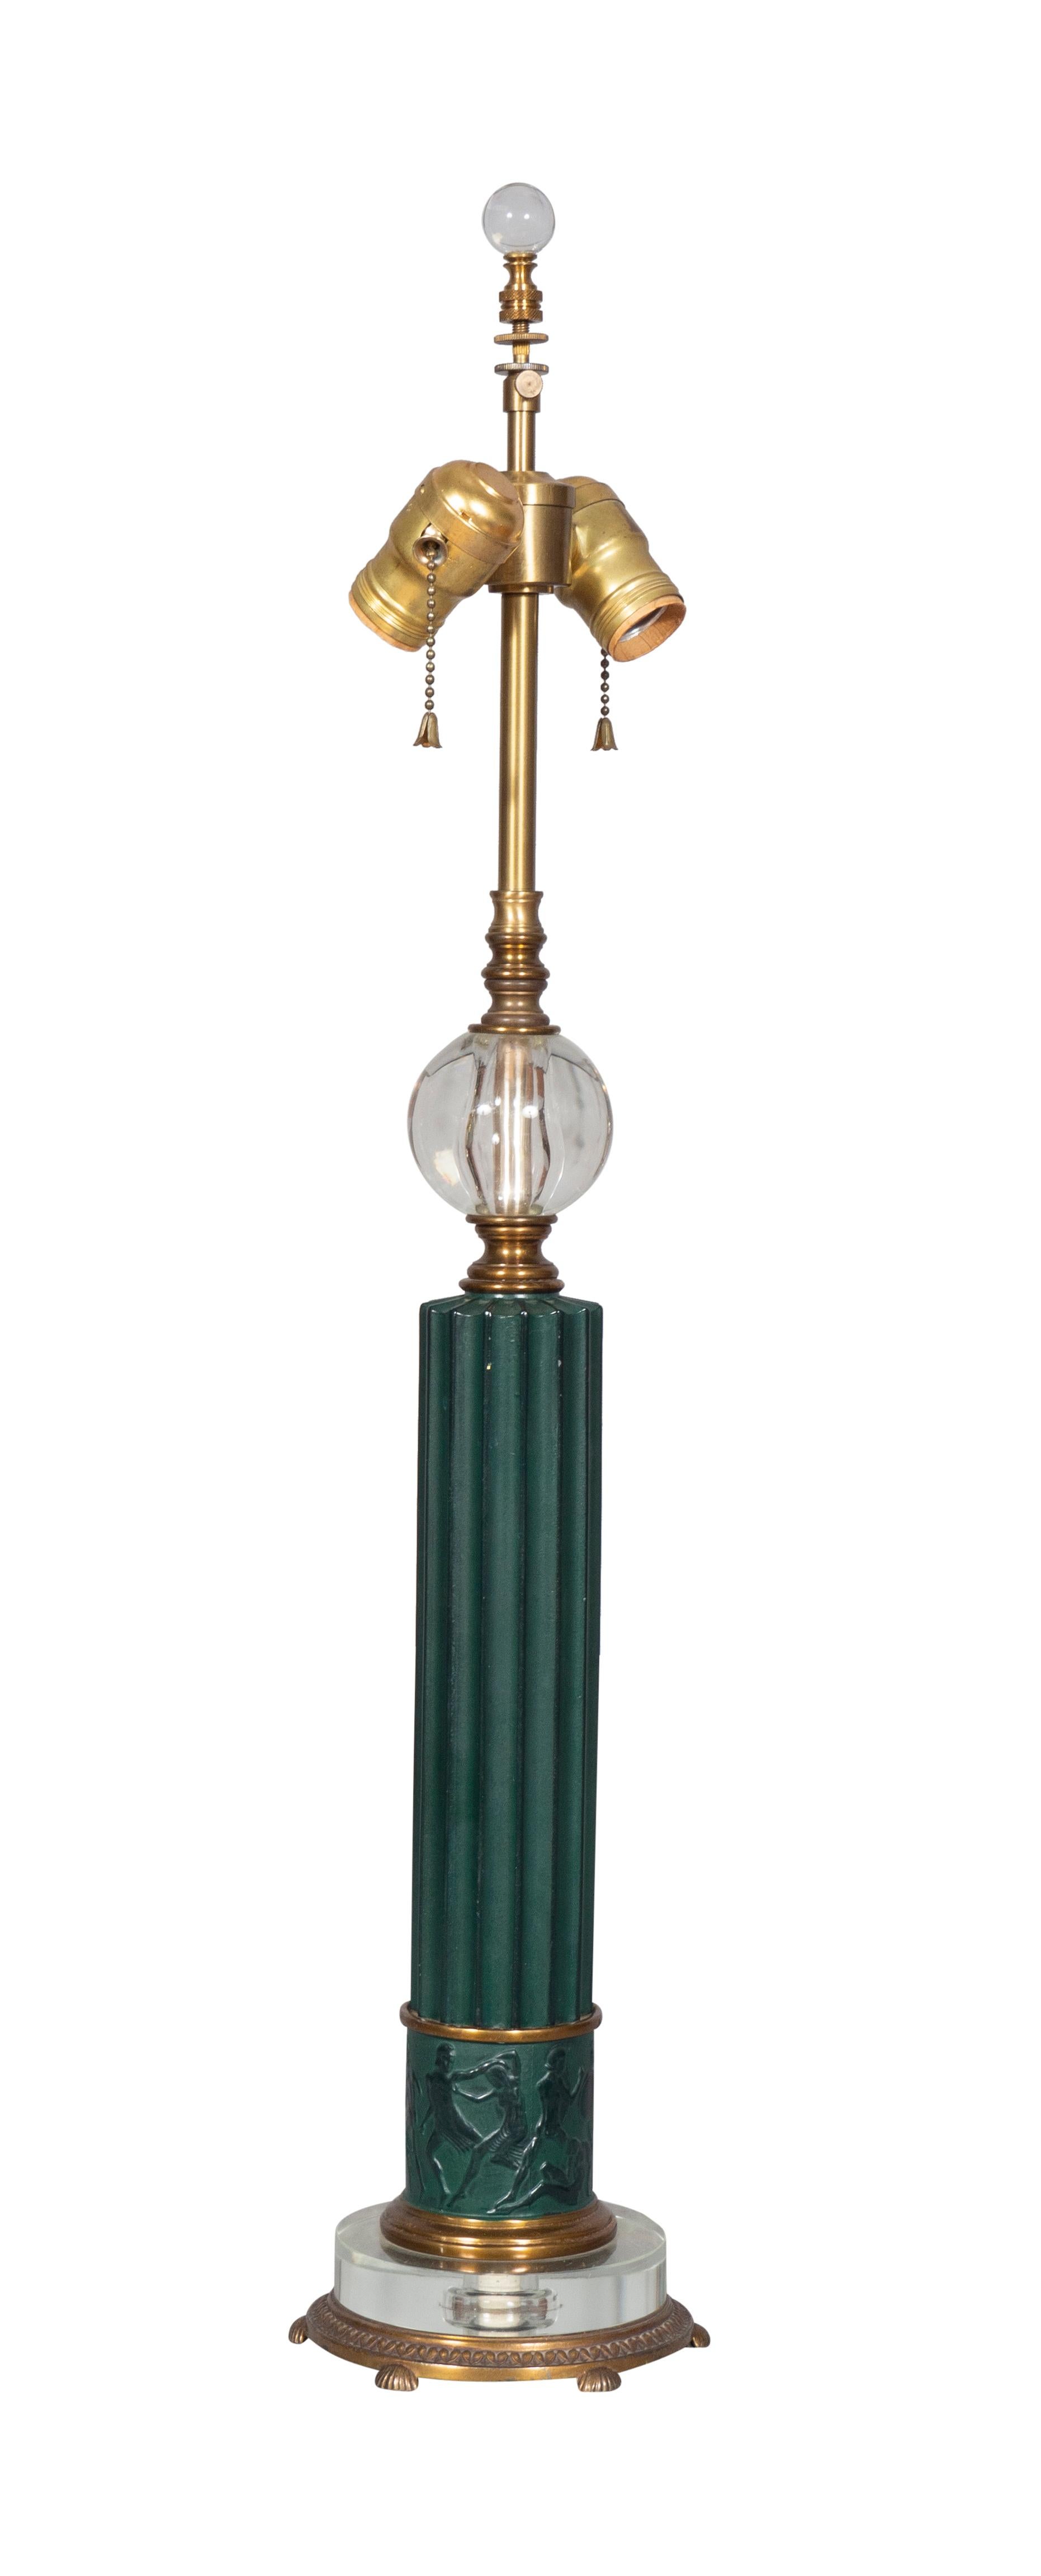 With two light sockets, glass orb over a fluted column ending on a glass disc and footed brass base.